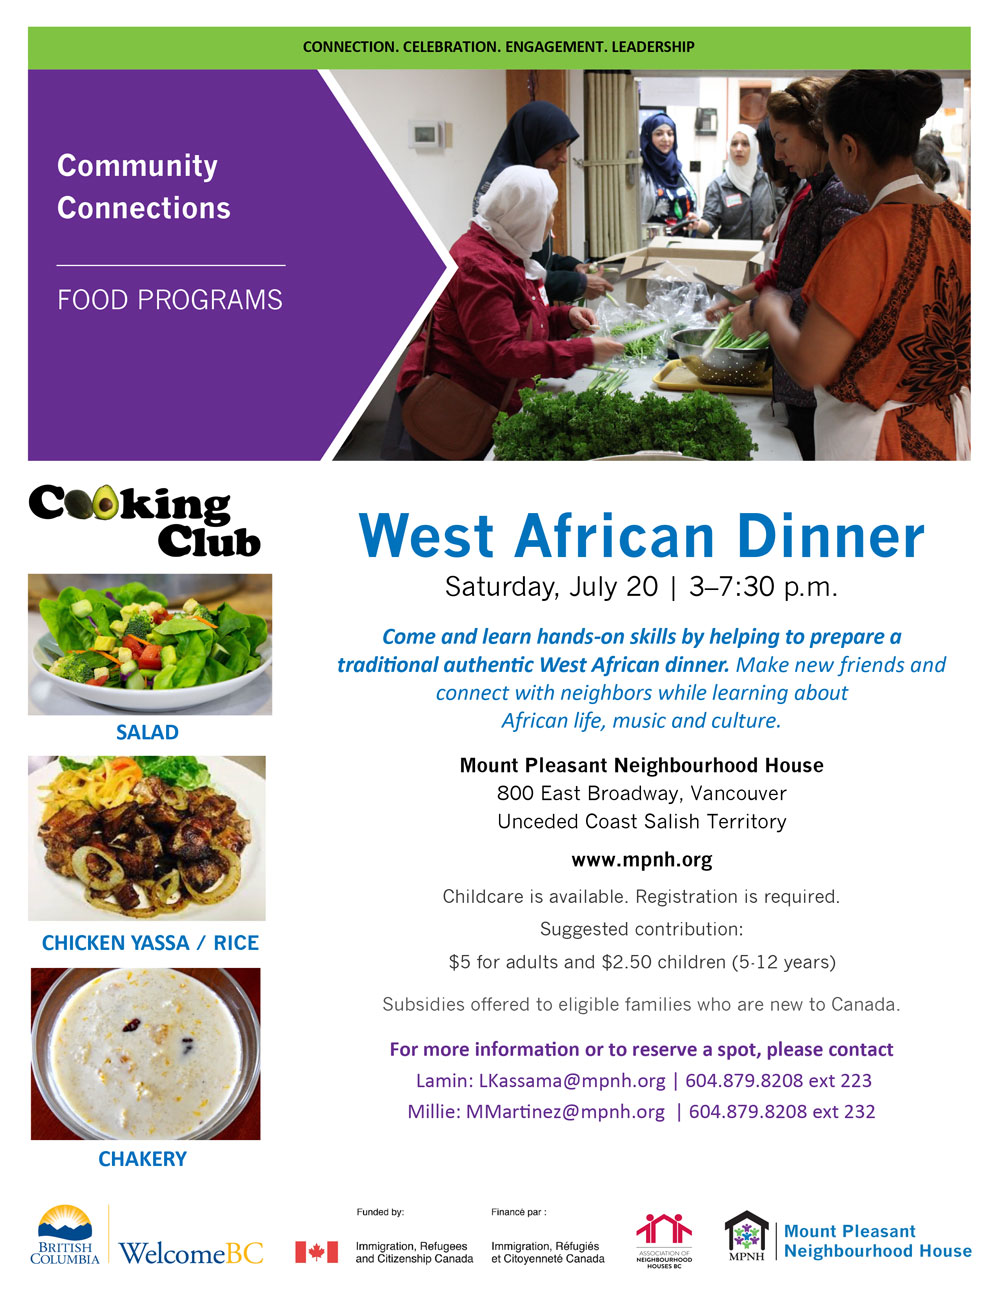 An image of the poster with event details, featuring a photo of people working together and preparing vegetables in the kitchen.